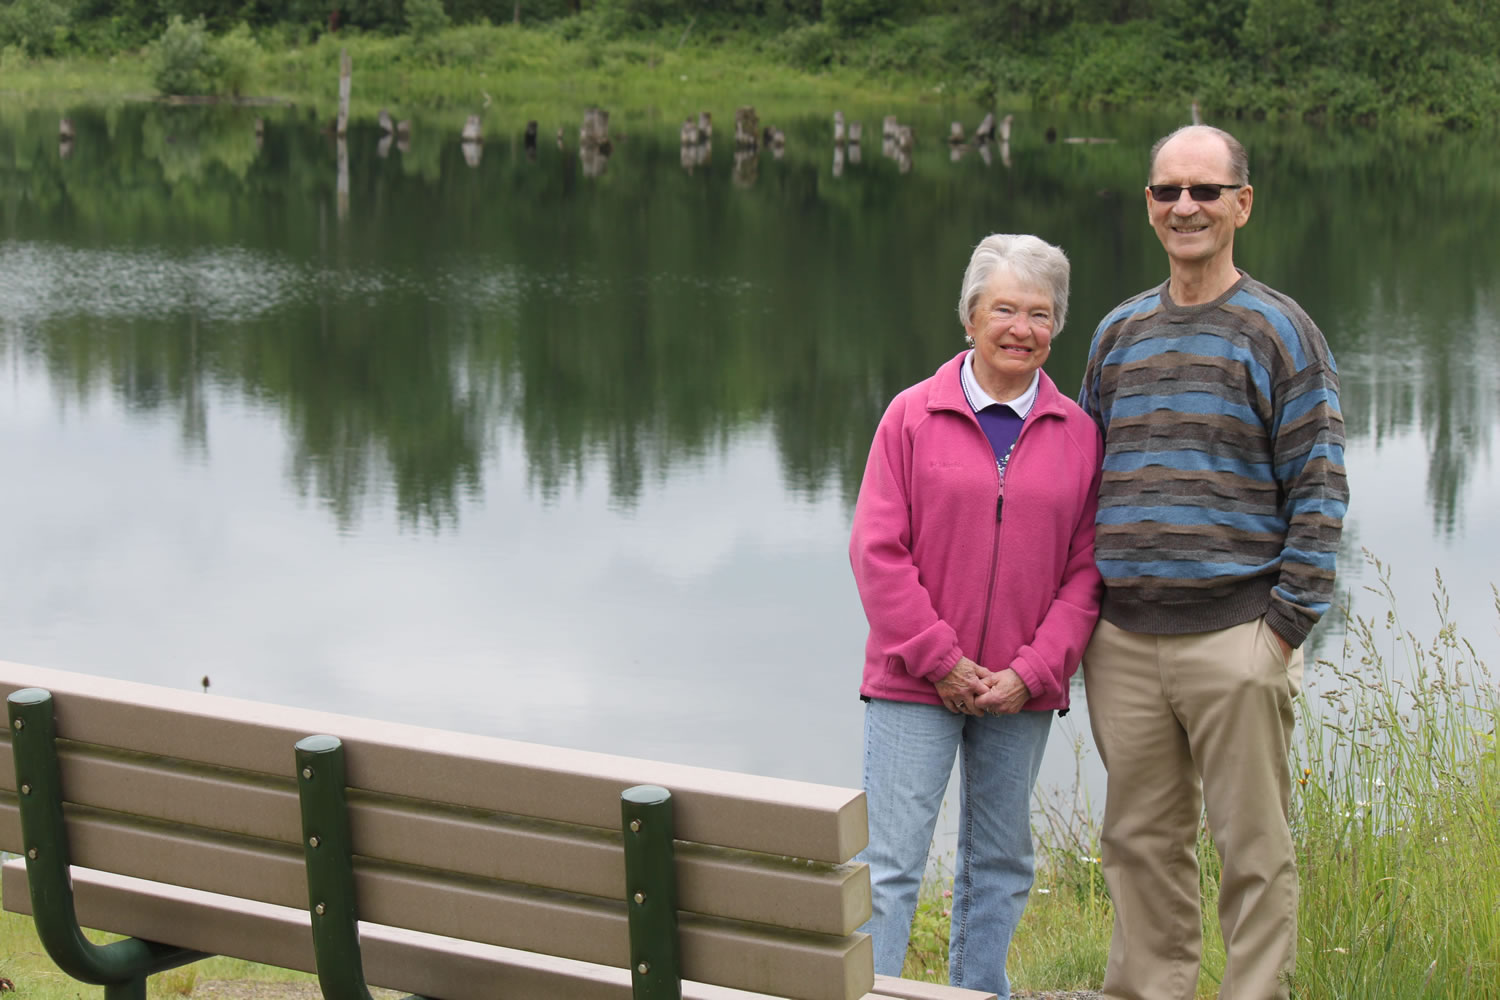 Vern and Faye Schanilec, of Washougal, recently made a contribution of $15,000 that will go to help construct an overlook deck on a pond located along the Washougal River Greenway Trail in Camas. The couple, who previously lived in Camas for 20 years, are frequent trail users.